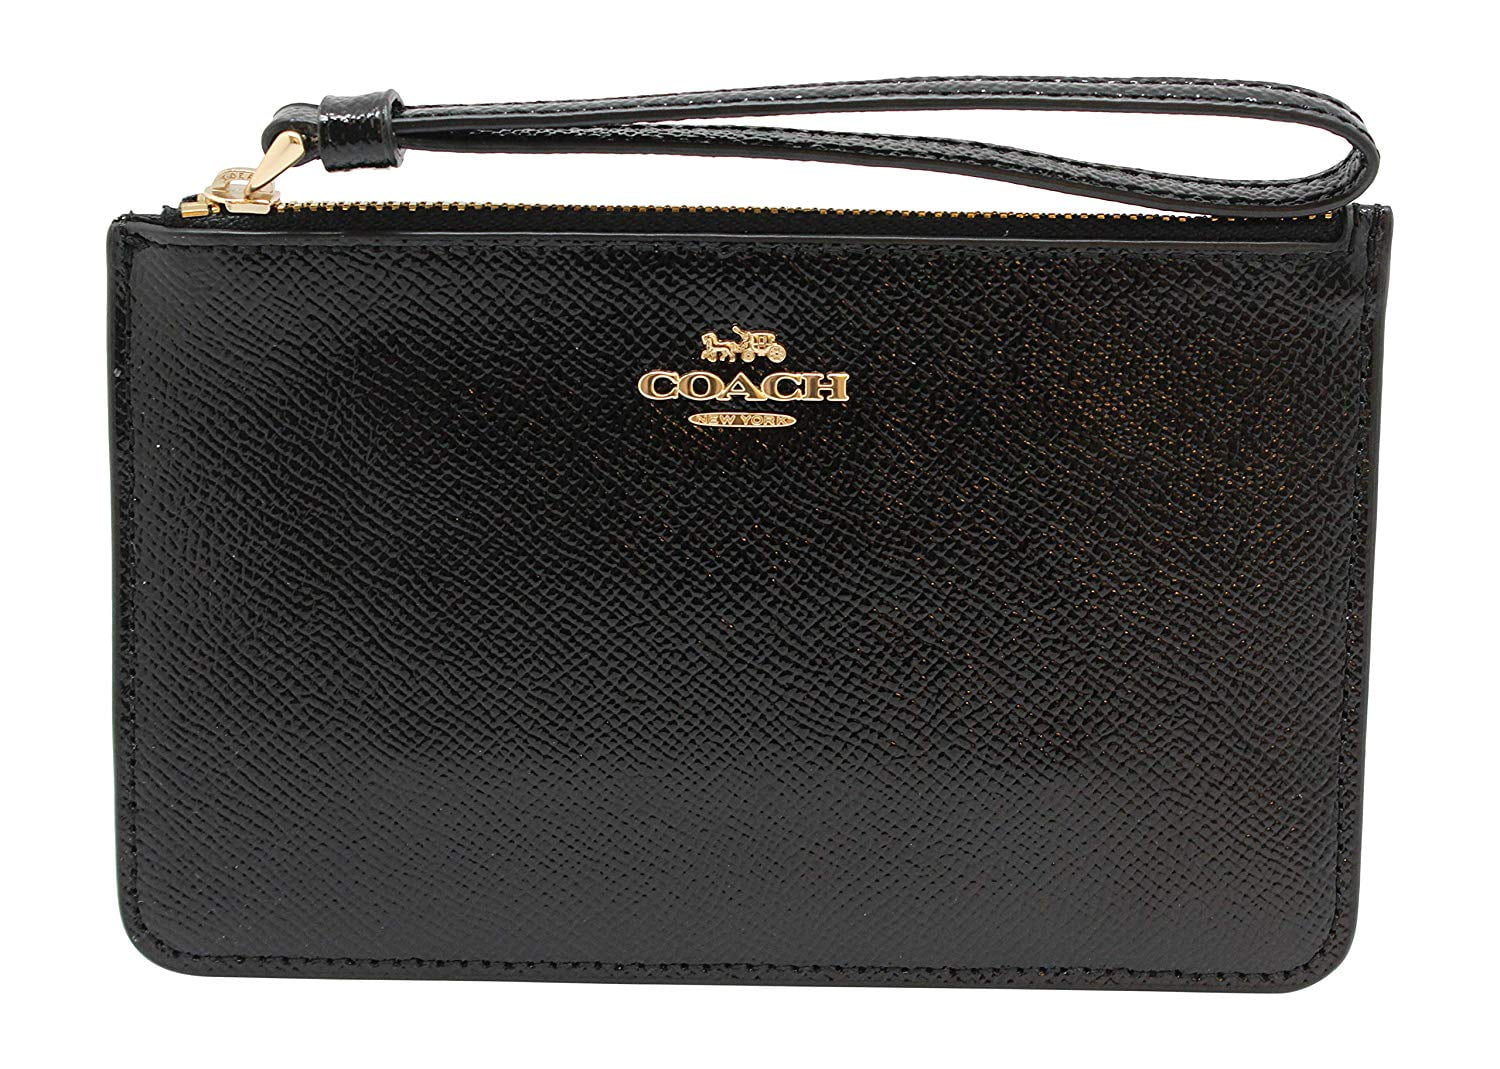 Coach Outlet Black Leather Wallet :: Keweenaw Bay Indian Community